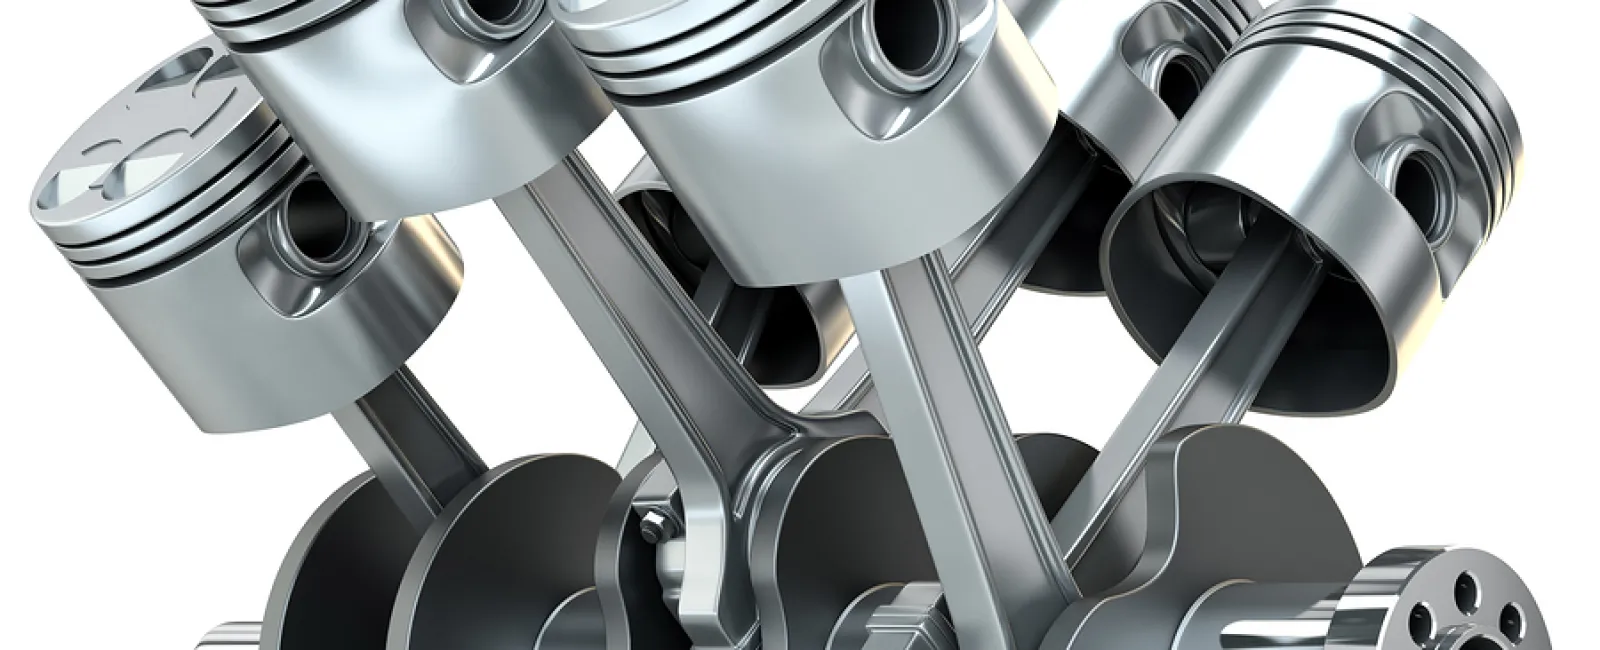 Pristine Pistons: How an Oil Change Can Keep Your Car Engine's Pistons Running Smoothly